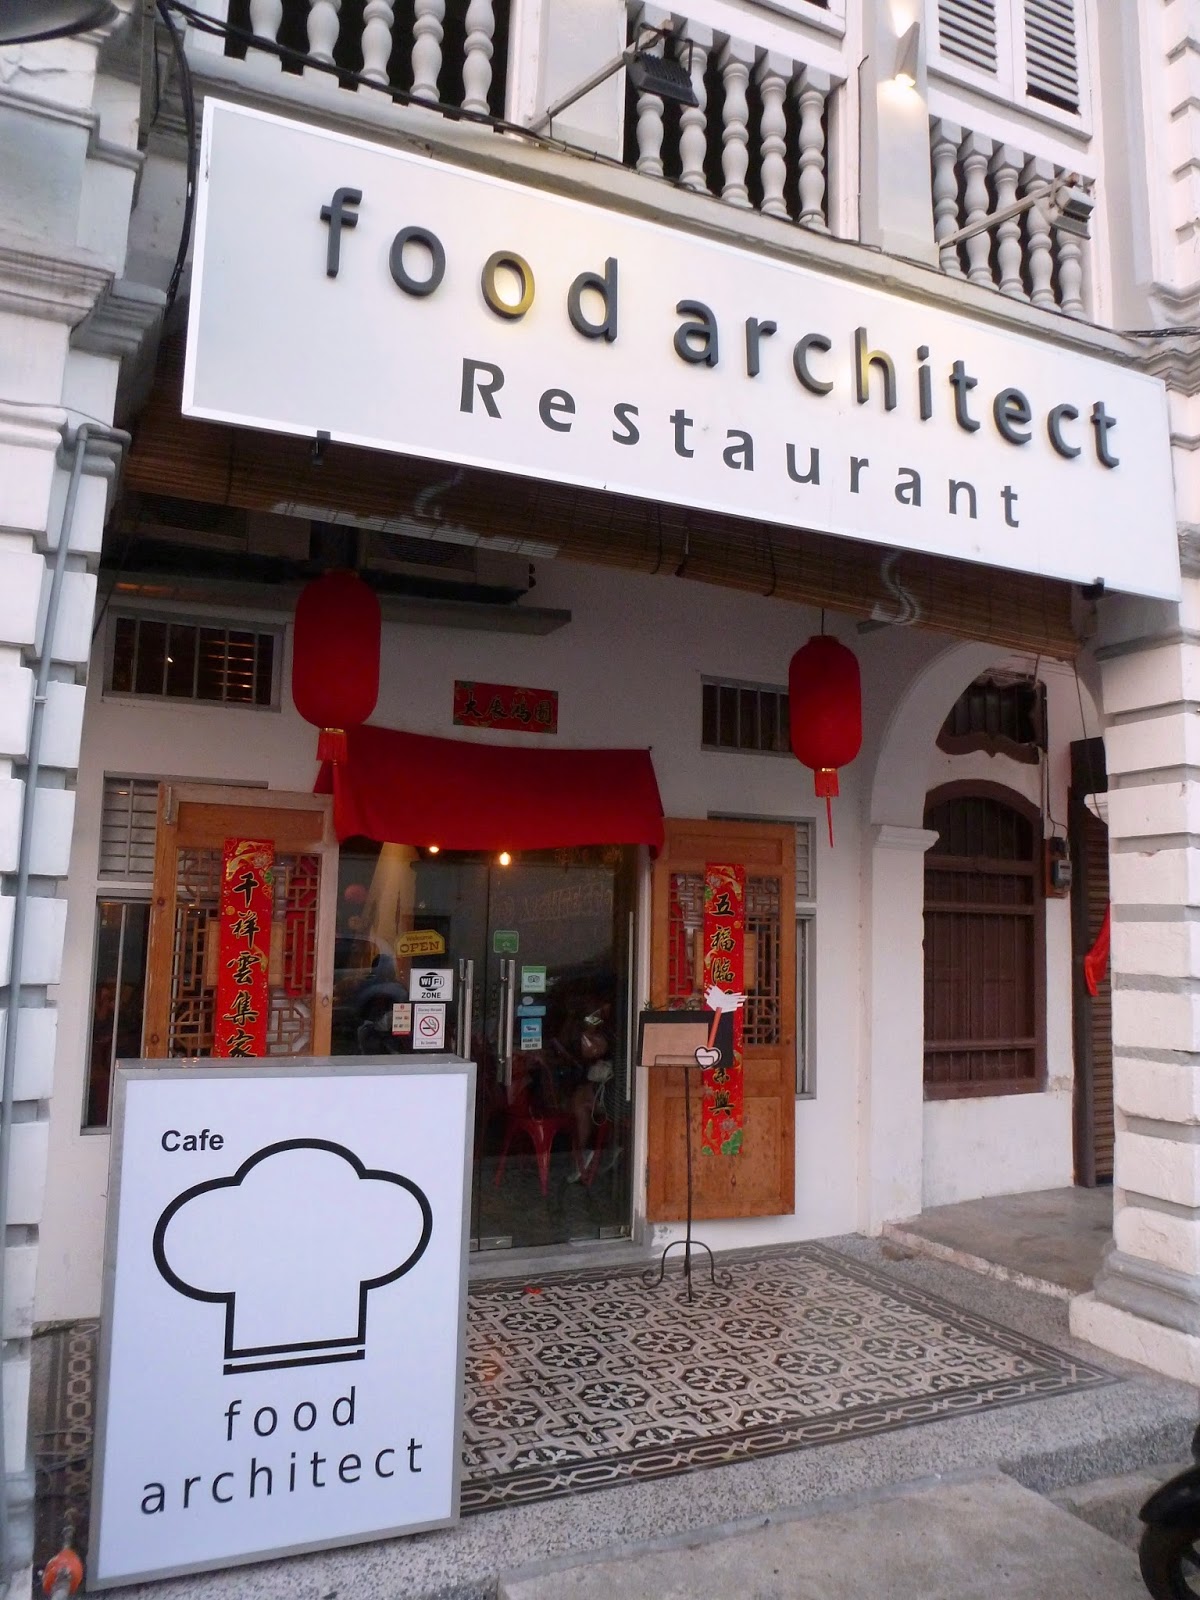 Penang Food For Thought: Food Architect